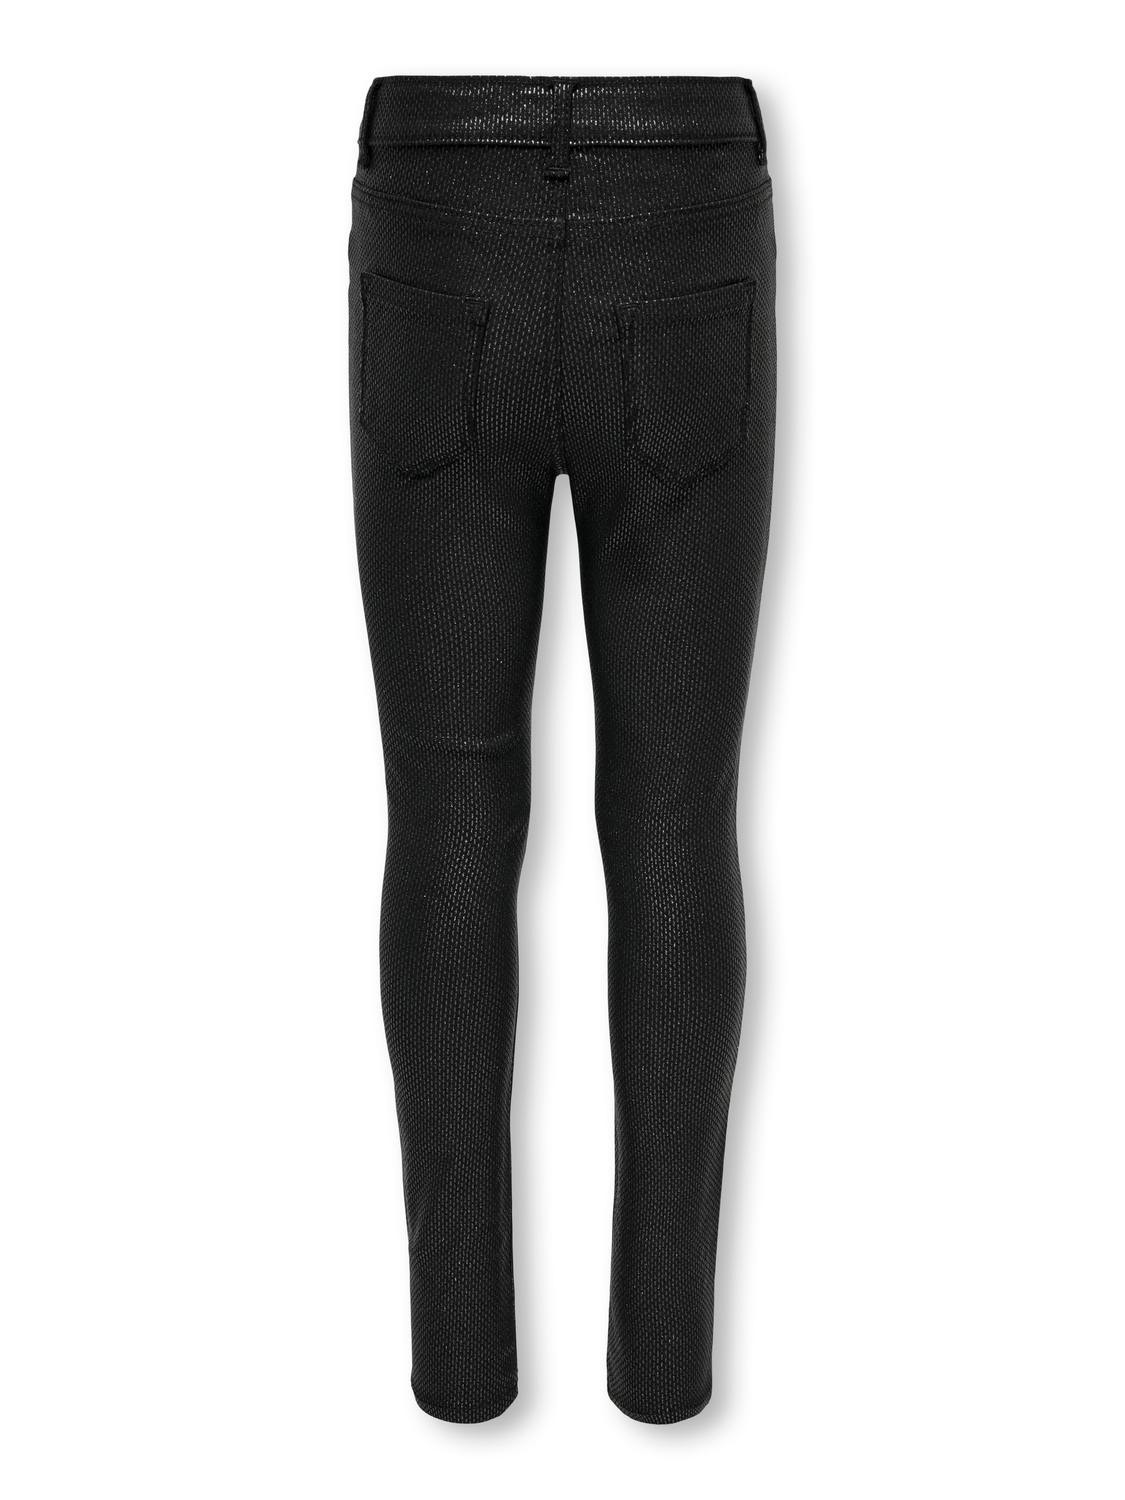 ONLY Skinny Trousers -Black - 15276791